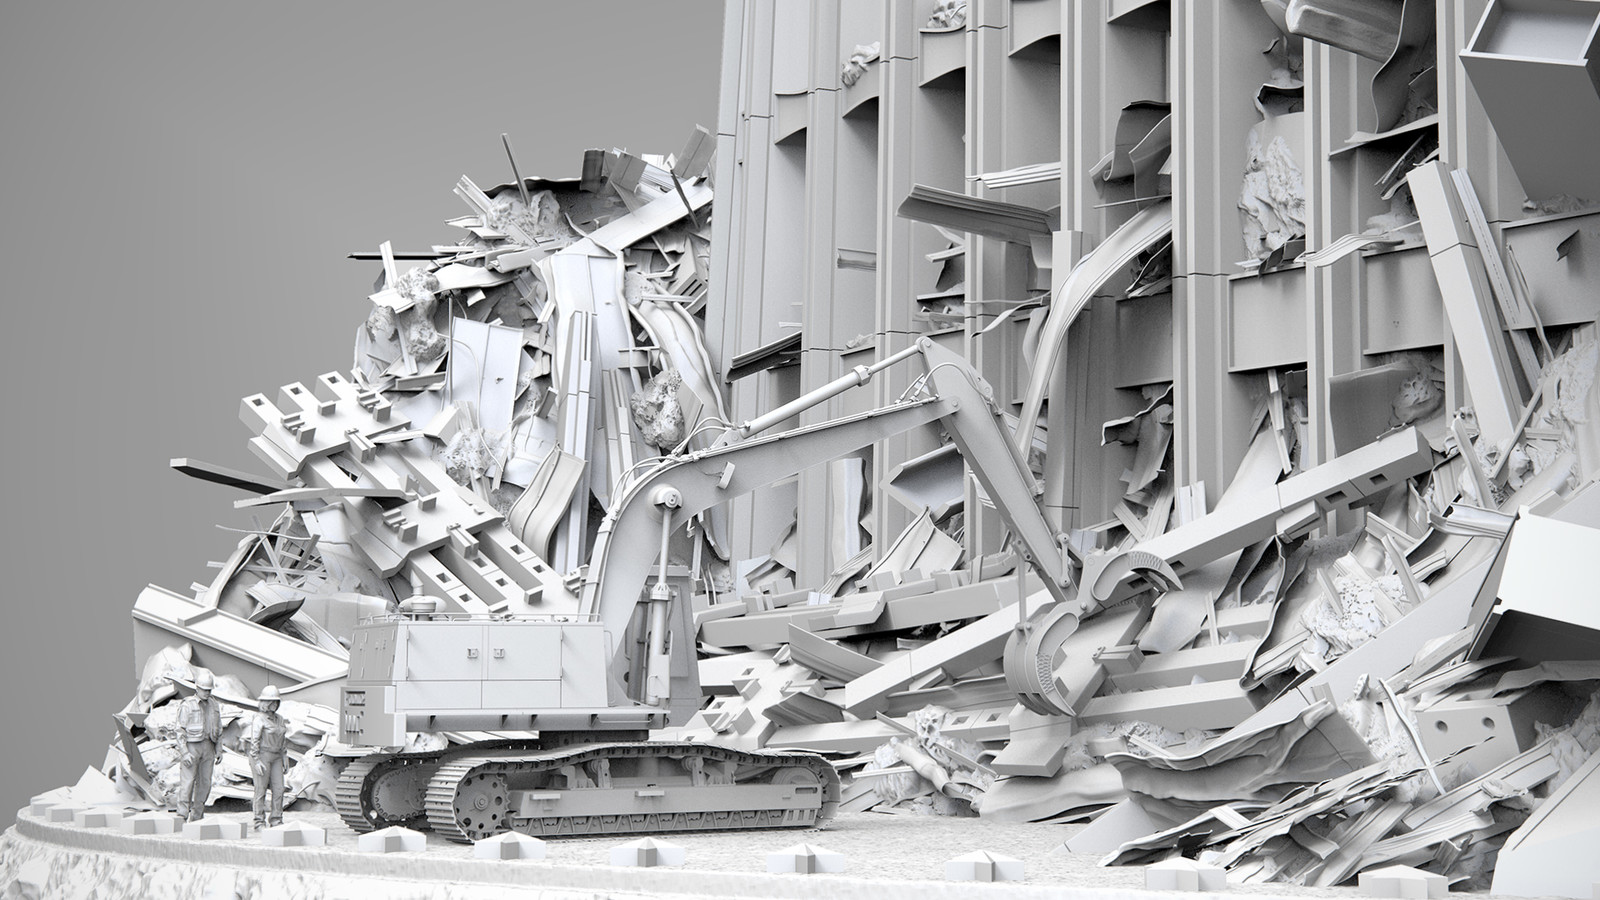 I only made the rubble in this image and set up the render.